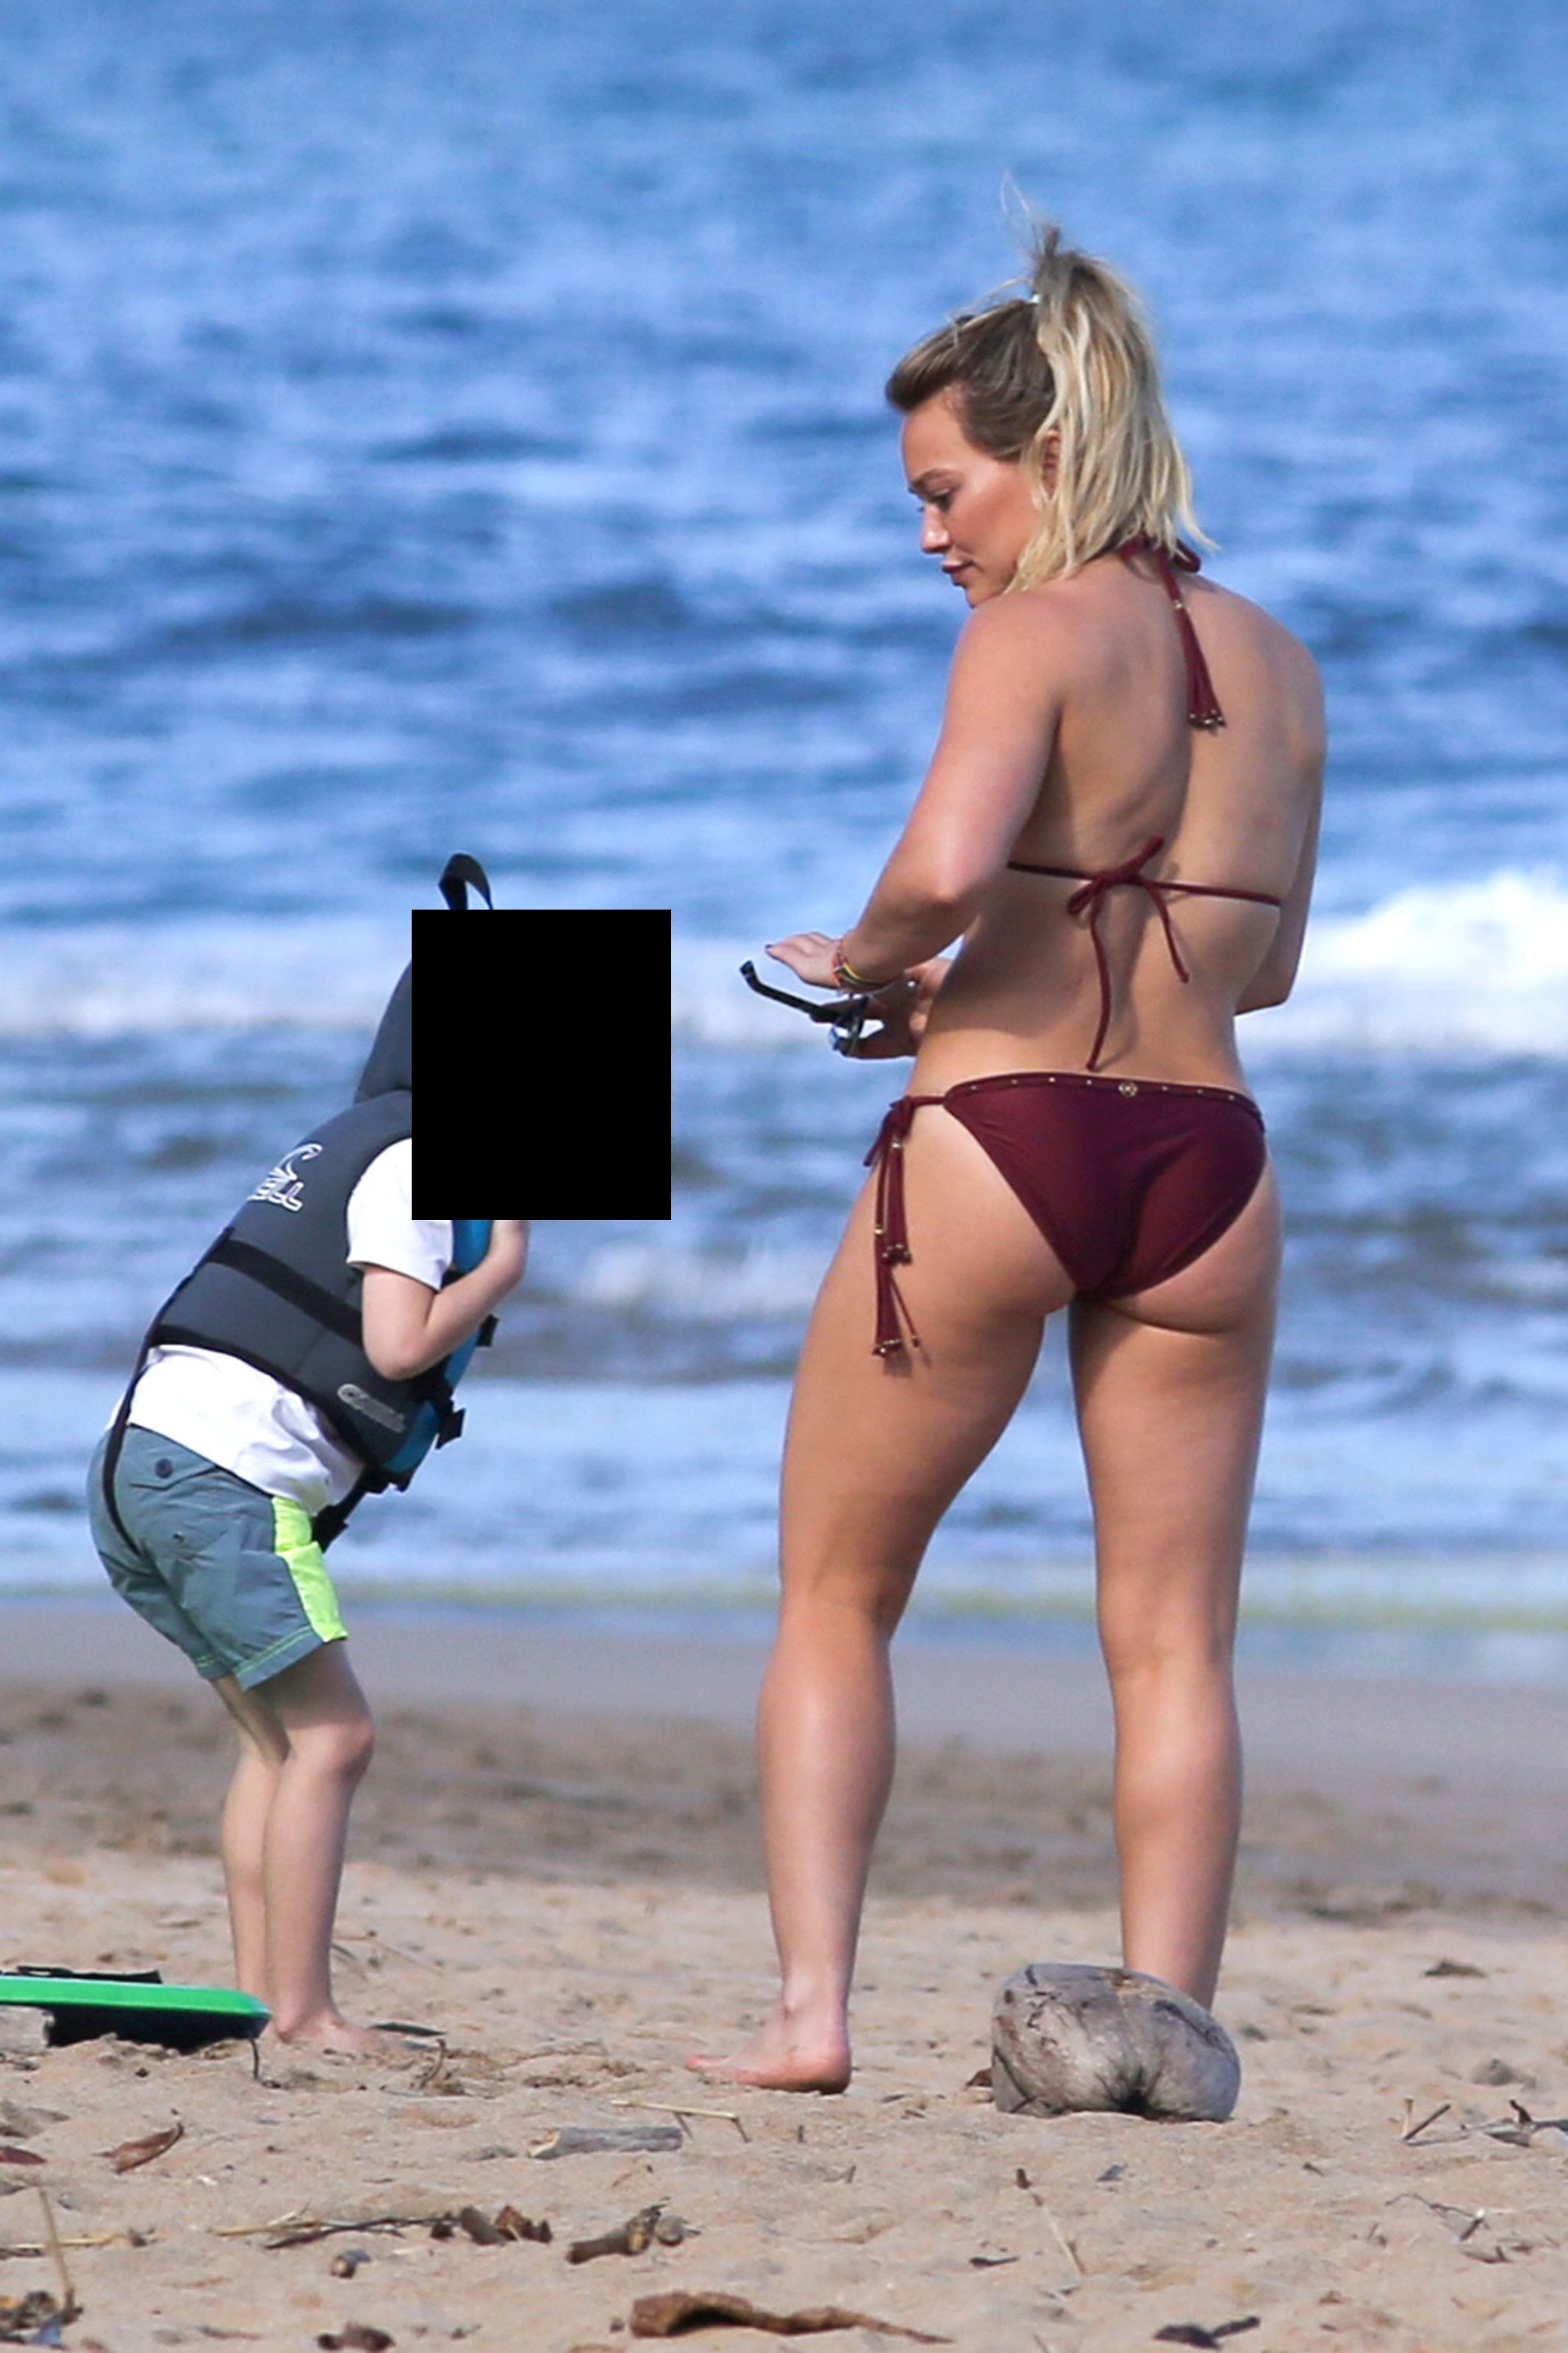 Pregnant Wife Naked On Beach - Hilary Duff Nude Pregnant - PICS PORN